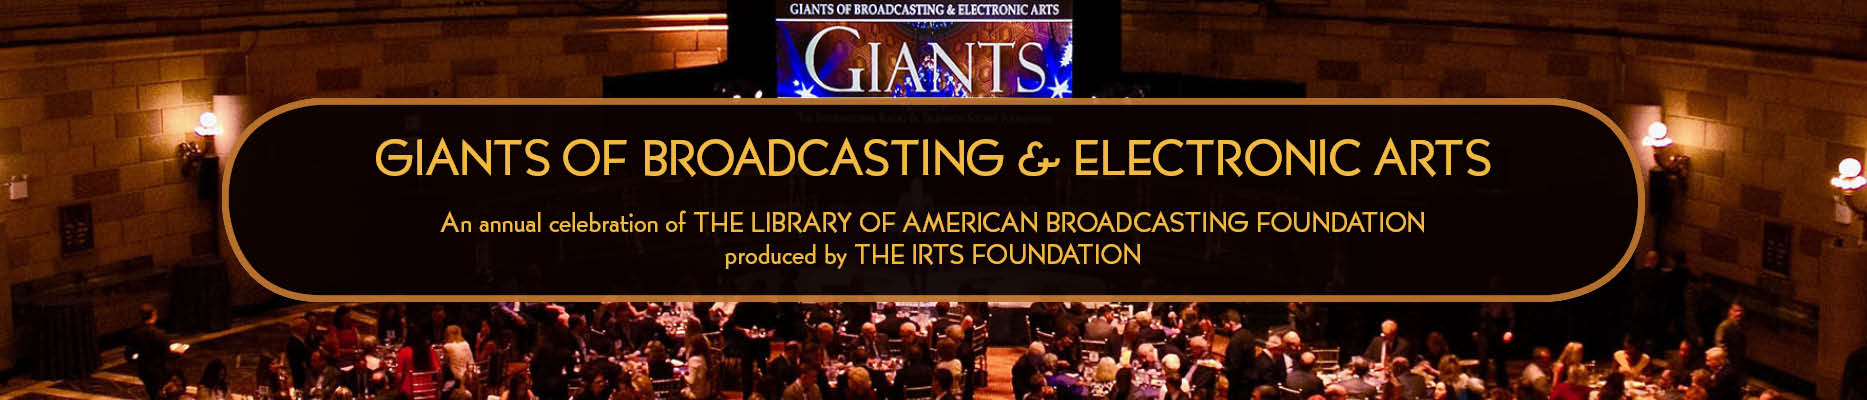 GIANTS OF BROADCASTING & ELECTRONIC ARTS An annual celebration of THE LIBRARY OF AMERICAN BROADCASTING FOUNDATION produced by THE IRTS FOUNDATION